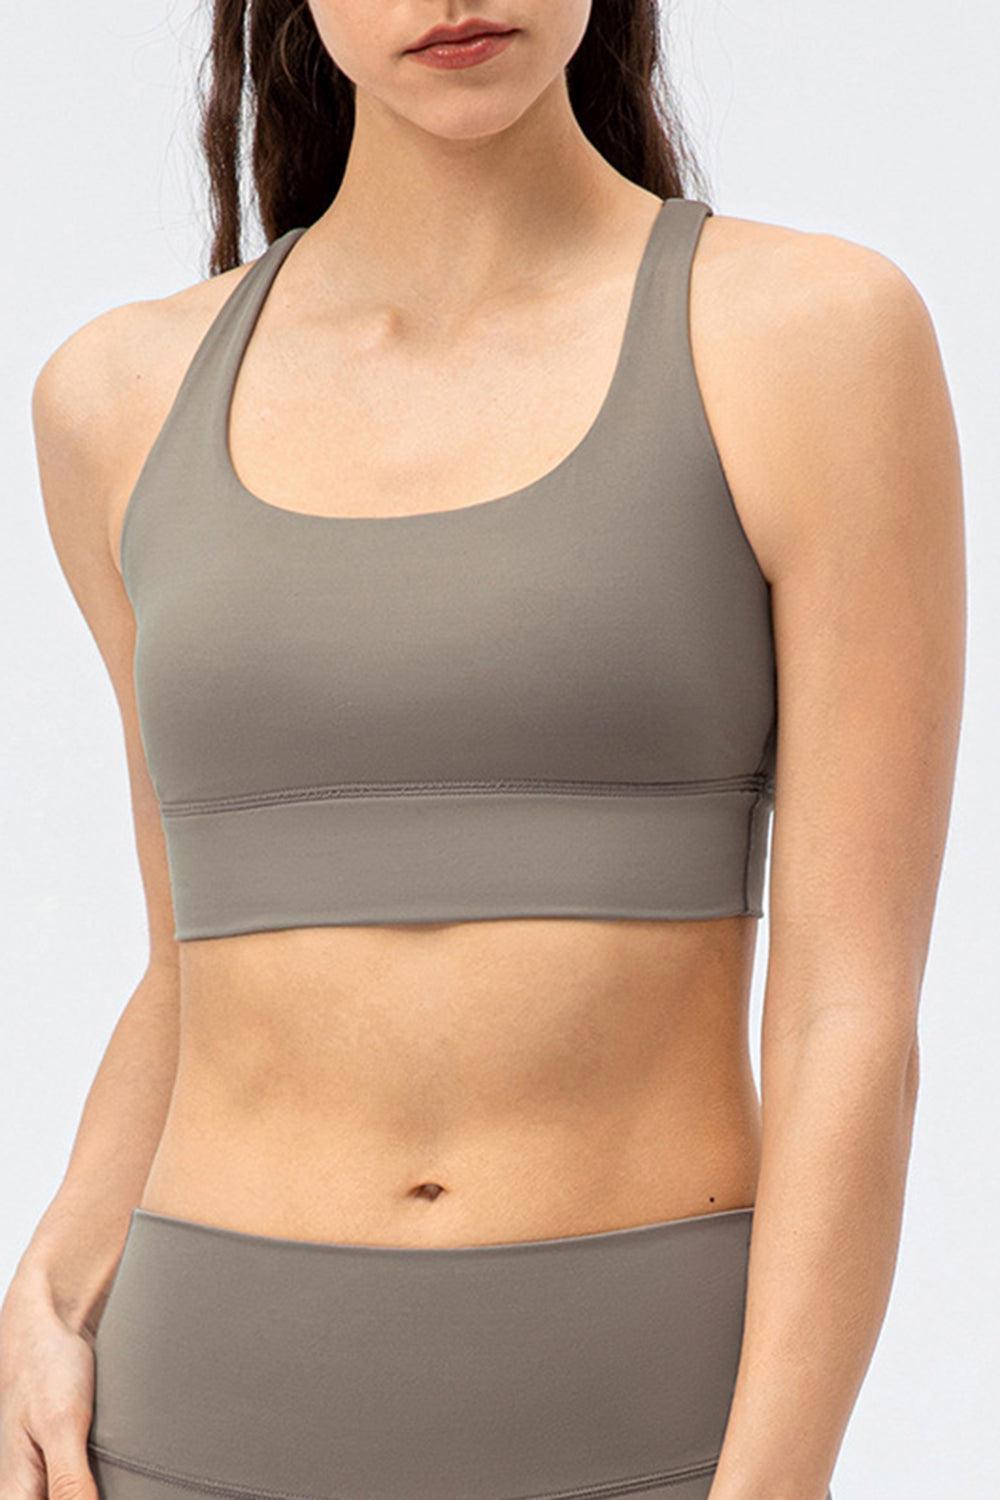 a woman in a gray sports bra top